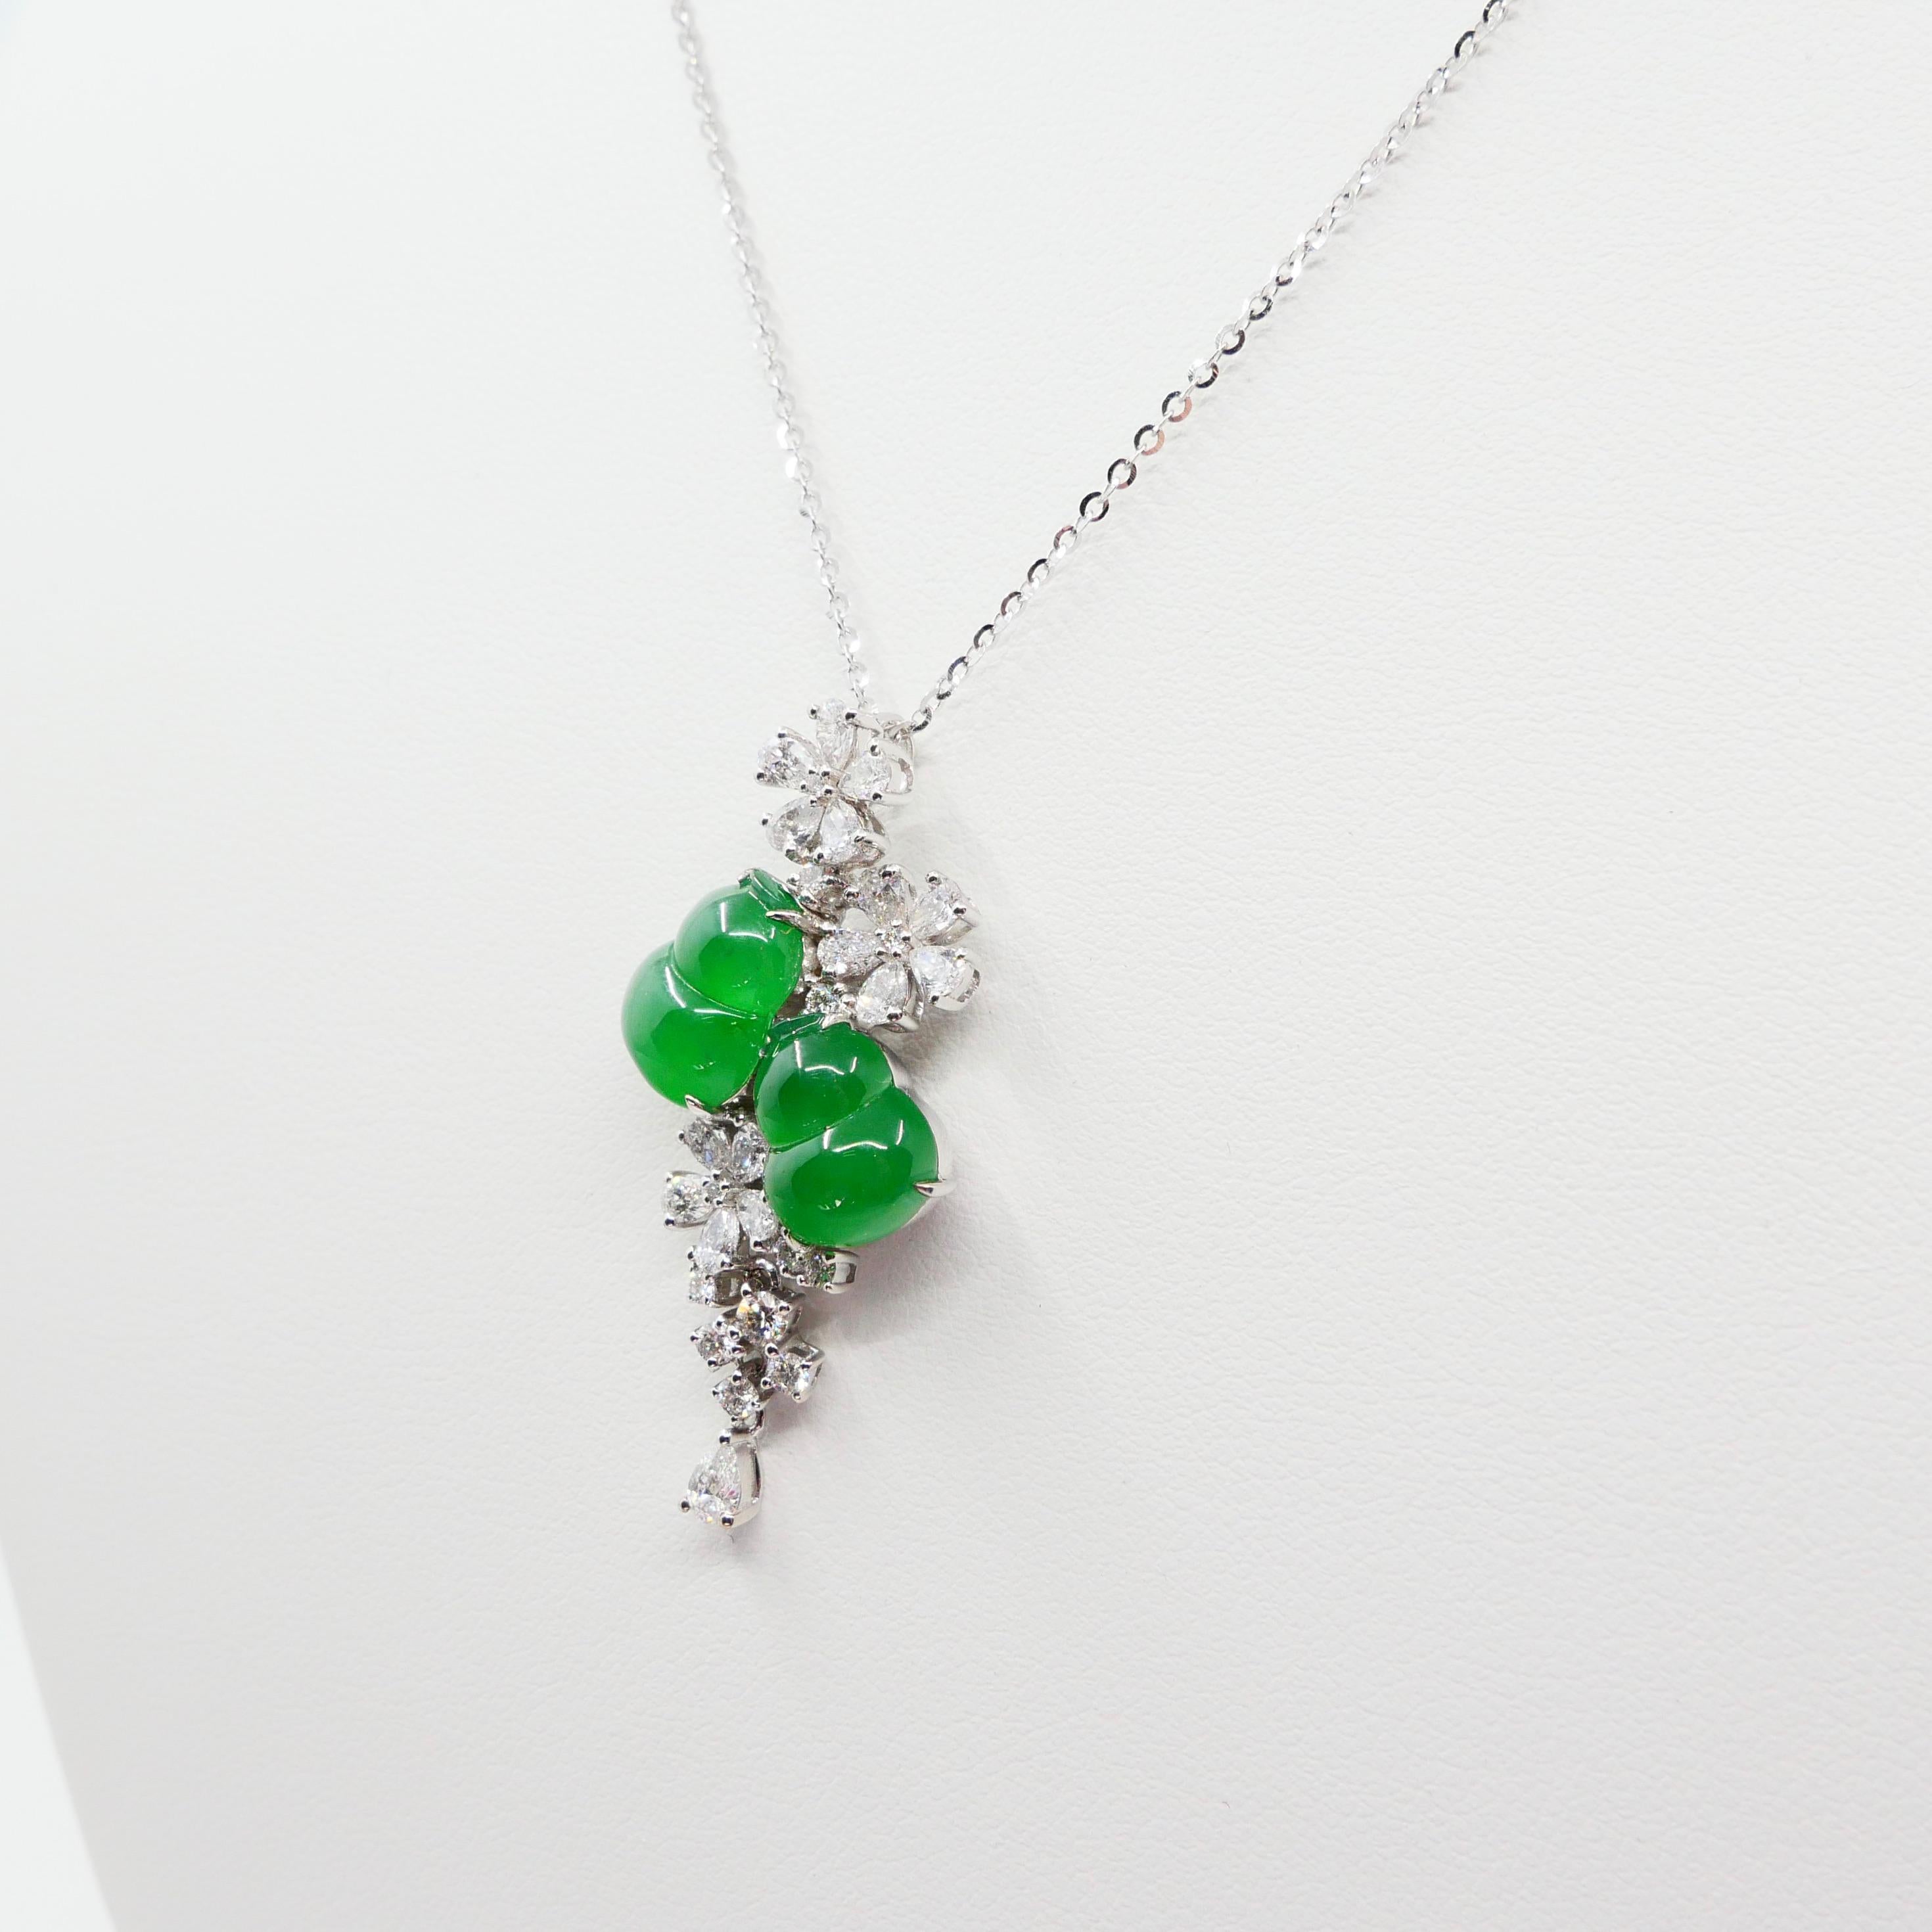 Certified Type A Icy Jade Gourd Diamond Pendant Necklace, Intense Apple Green For Sale 5